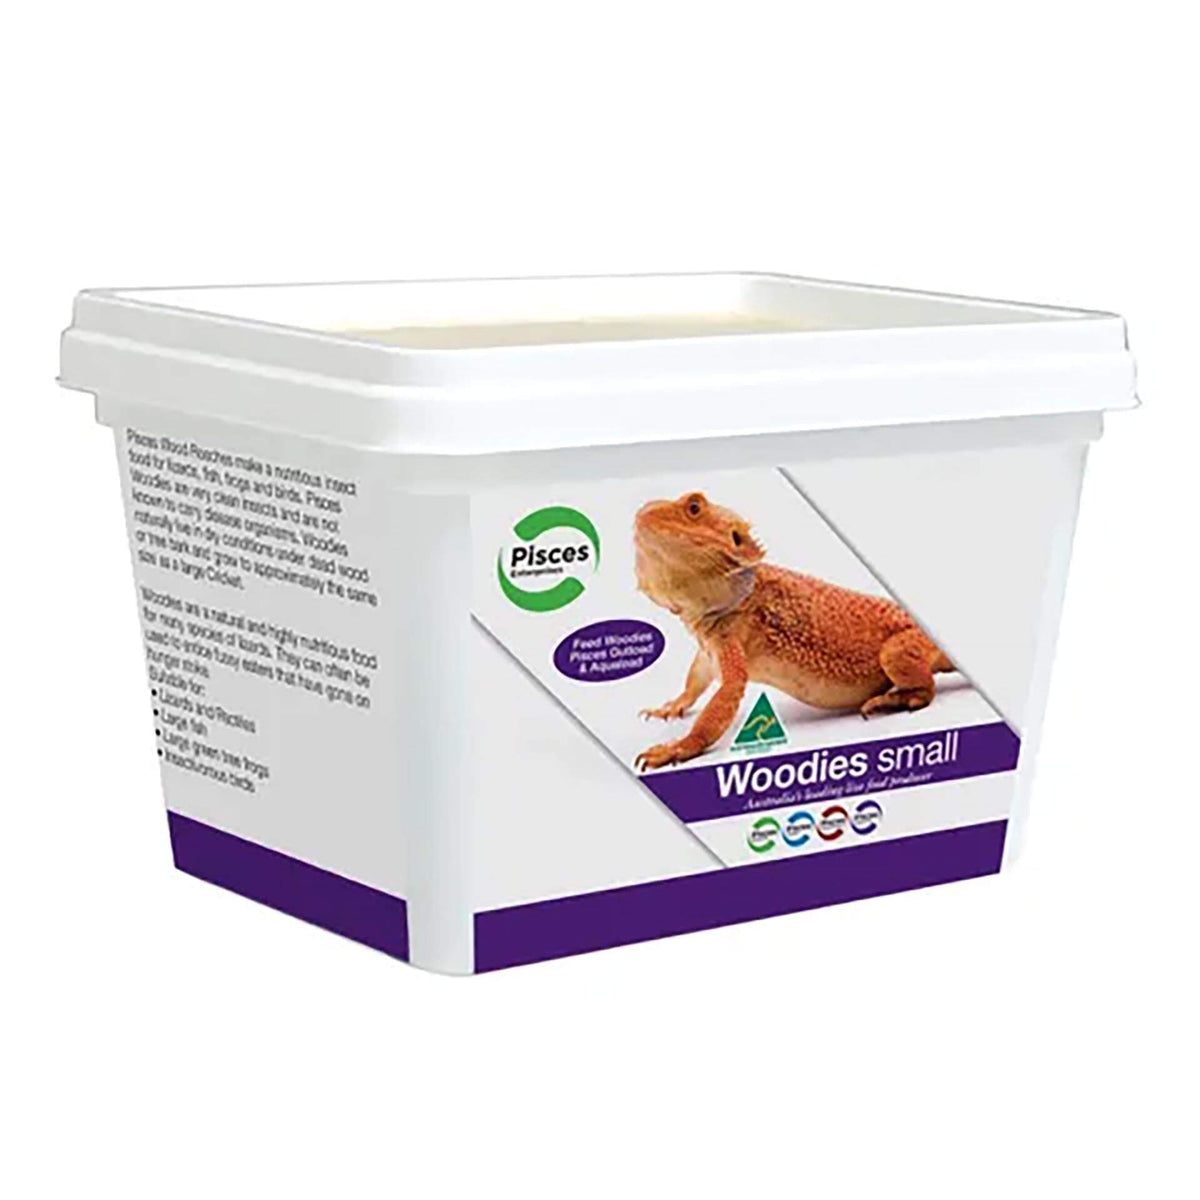 Pisces Woodies Small - 50g Tub Live Food - Instore Pick Up Only